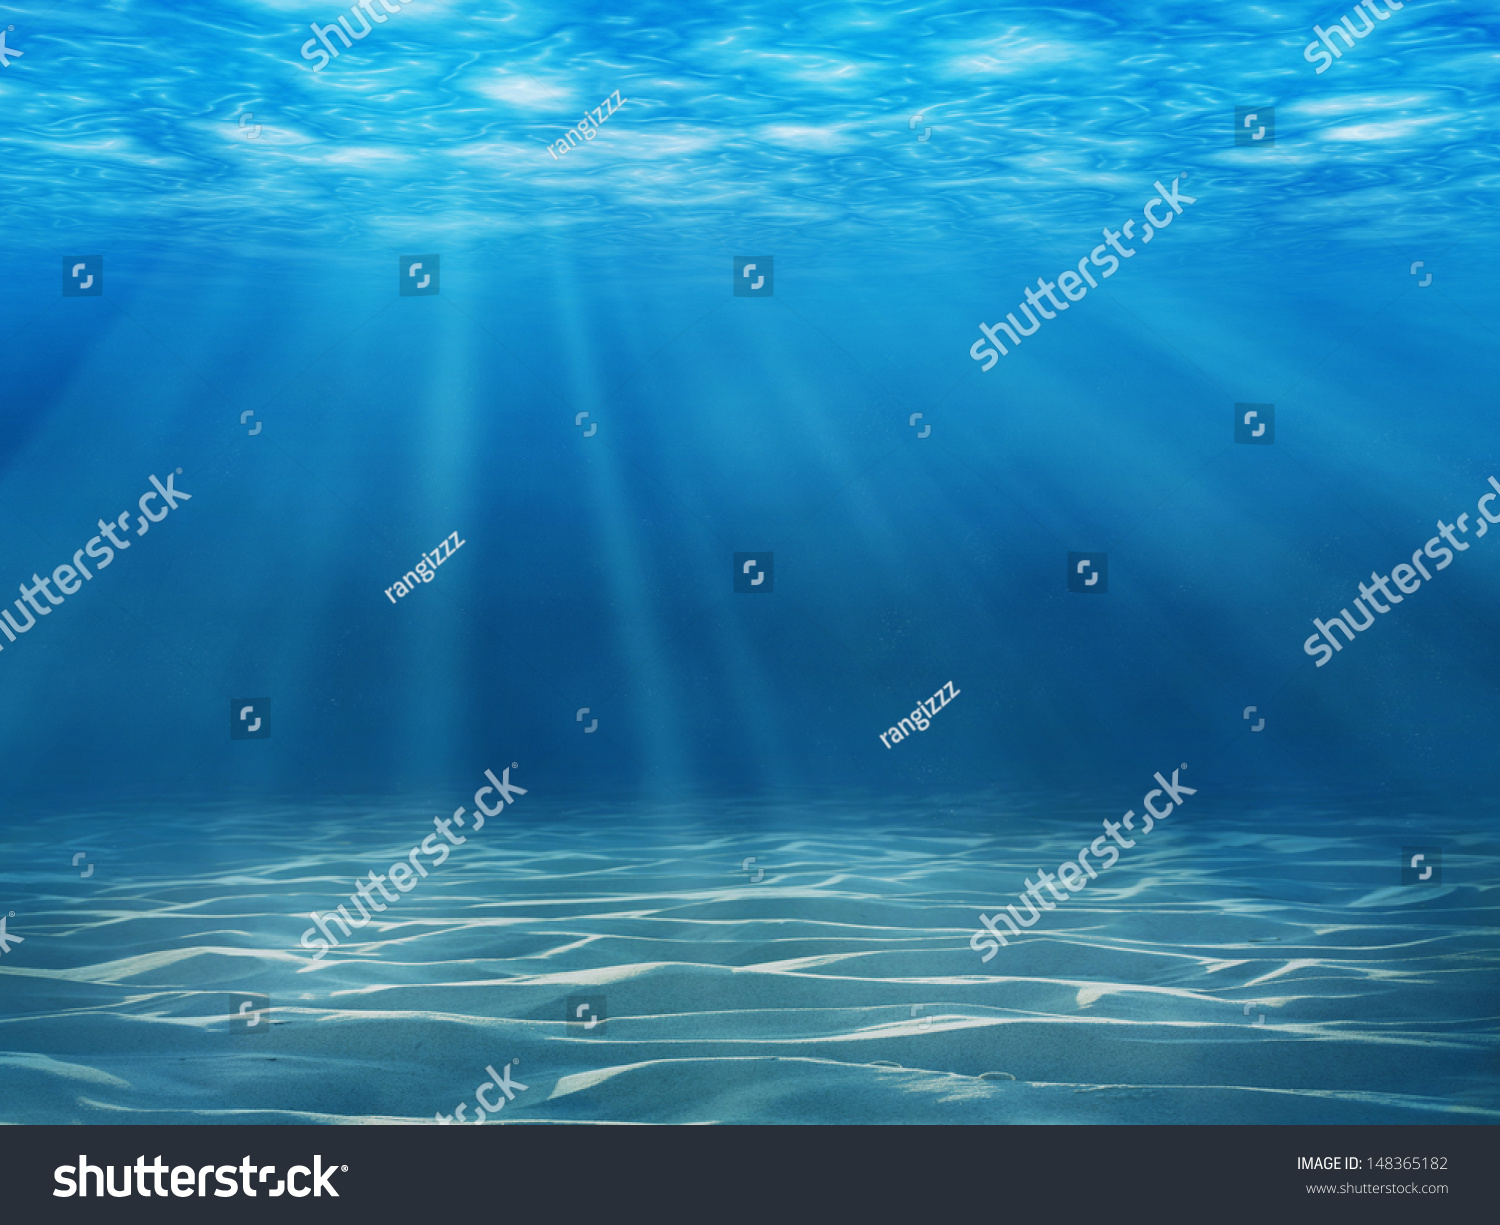 Tranquil underwater scene with copy space #148365182